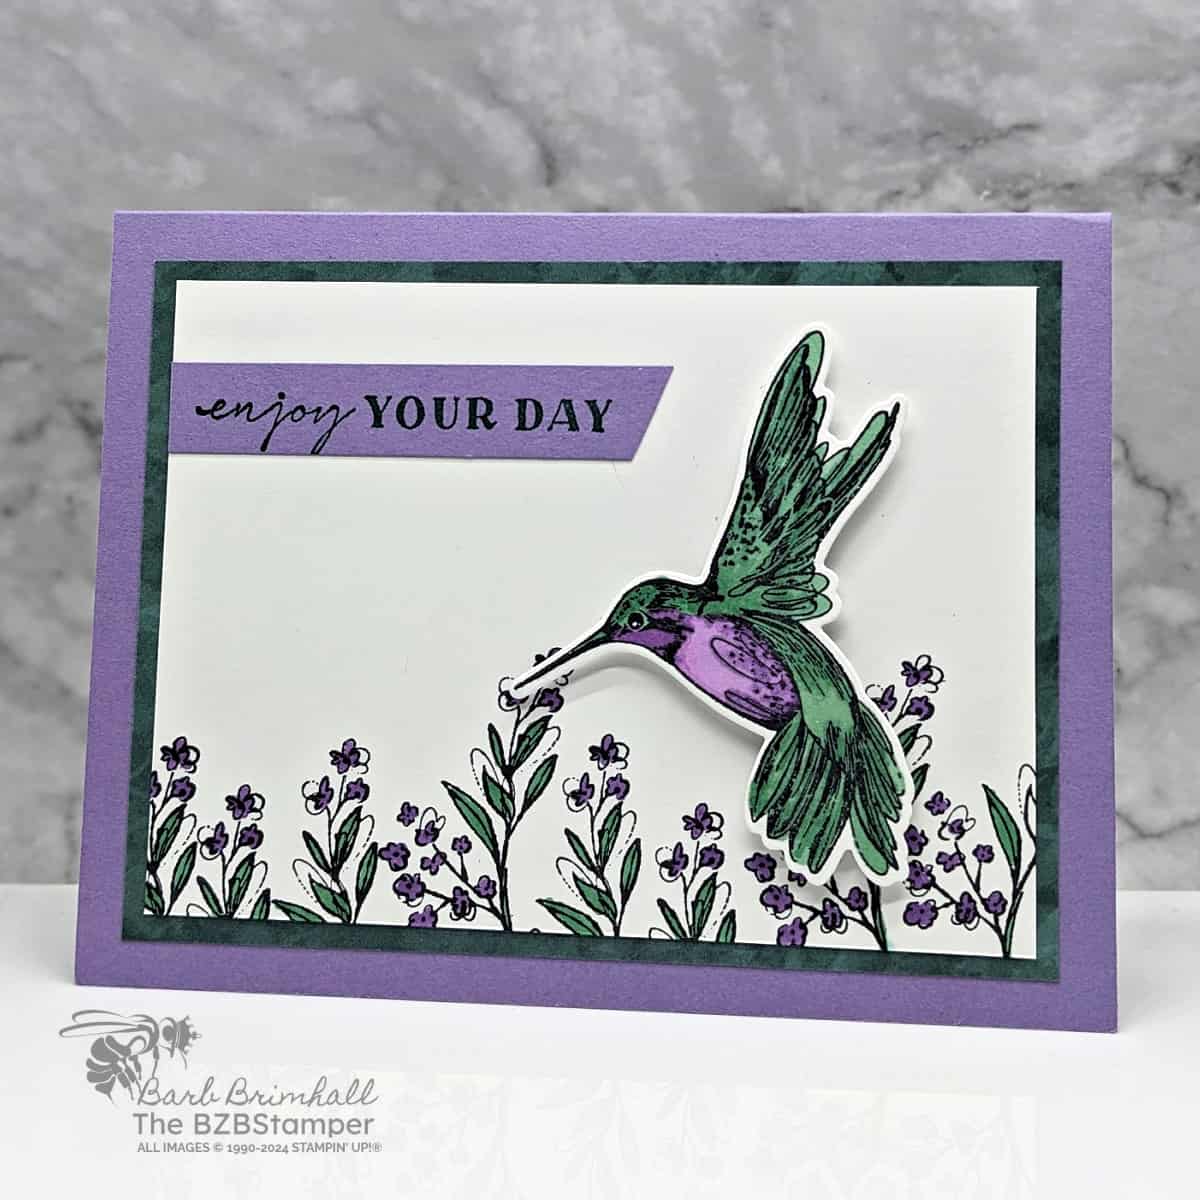 Embrace Creativity with the Thoughtful Expressions Bundle in purple and green featuring flowers and a hummingbird and an "enjoy your day" sentiment.